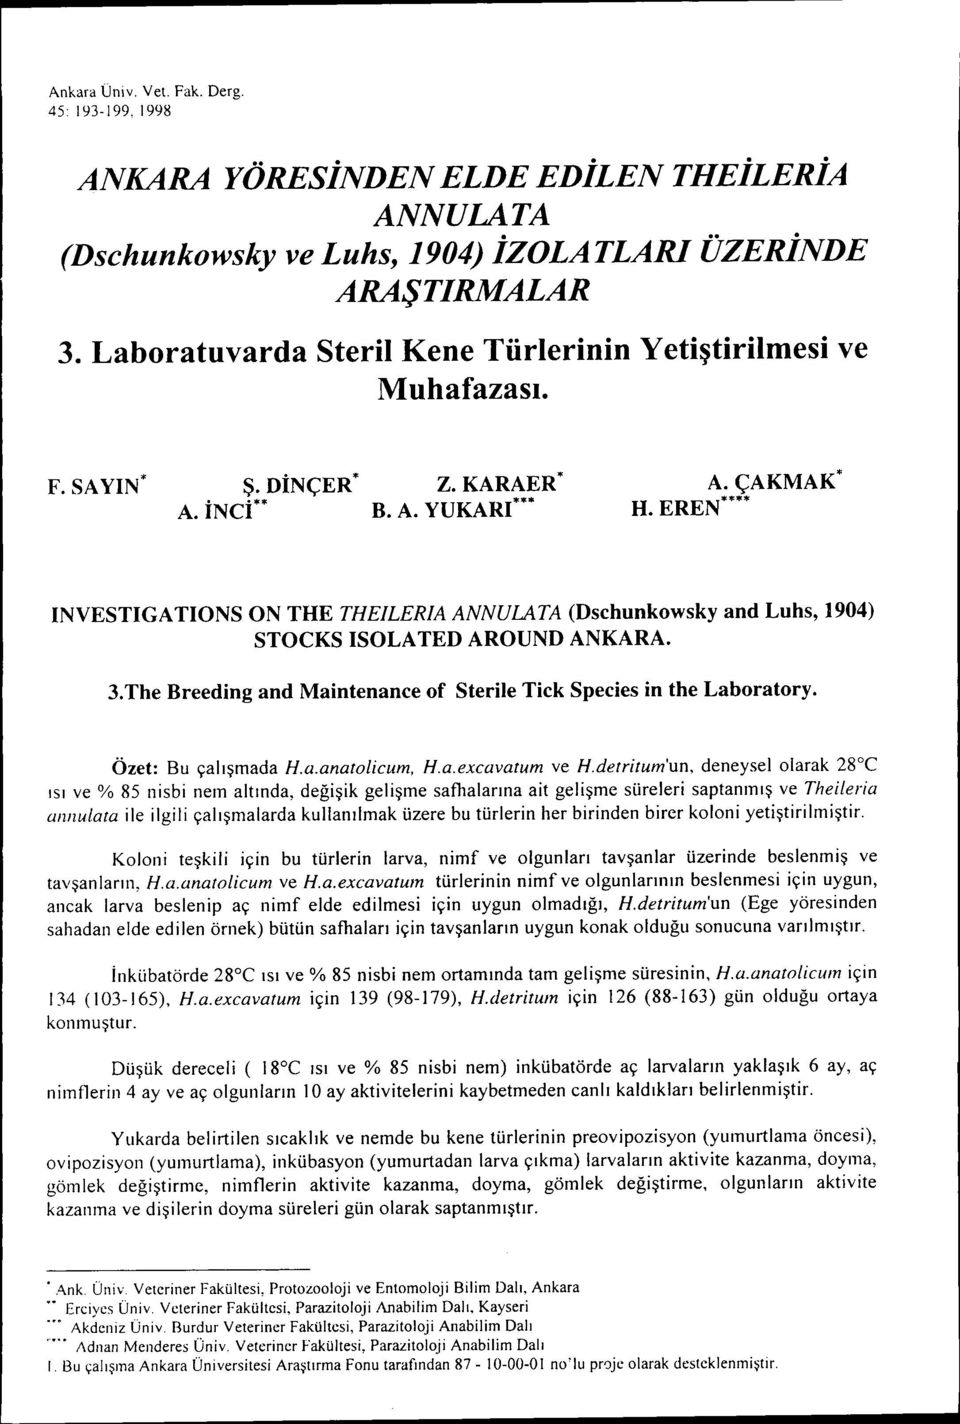 EREN**** INVESTIGATIONS ON THE THEILERIA ANNULATA (Dschunkowsky and Luhs, 1904) STOCKS ISOLATED AROUND ANKARA. 3.The Breeding and Maintenance of Sterile Tick Species in the Laboratory.